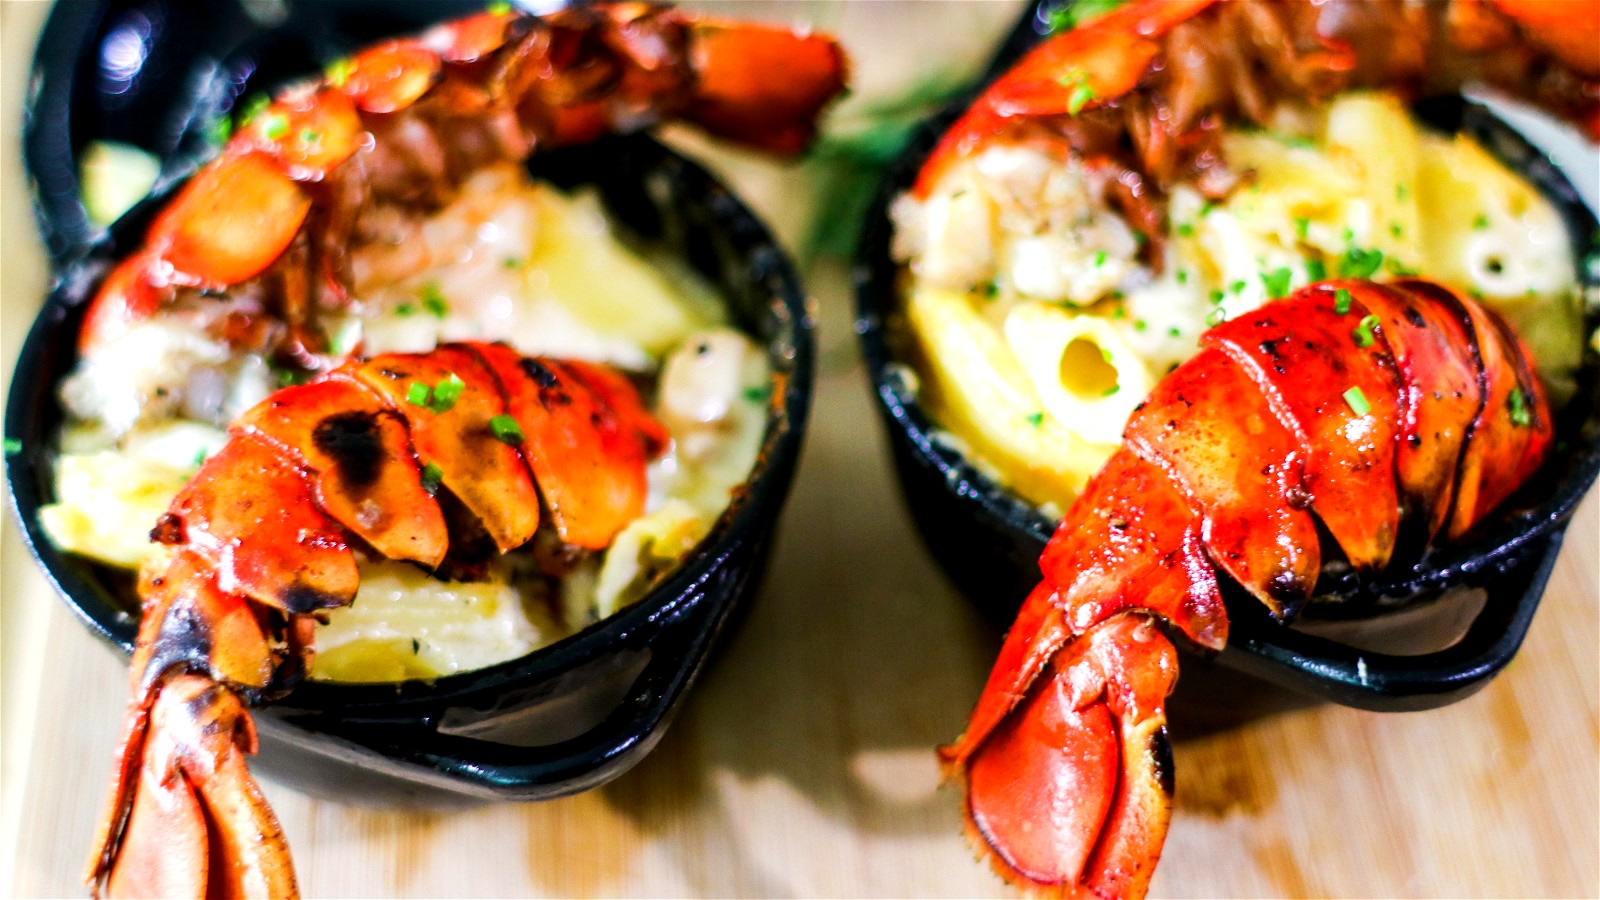 Image of LOBSTER TAILS WITH GARLIC BUTTER